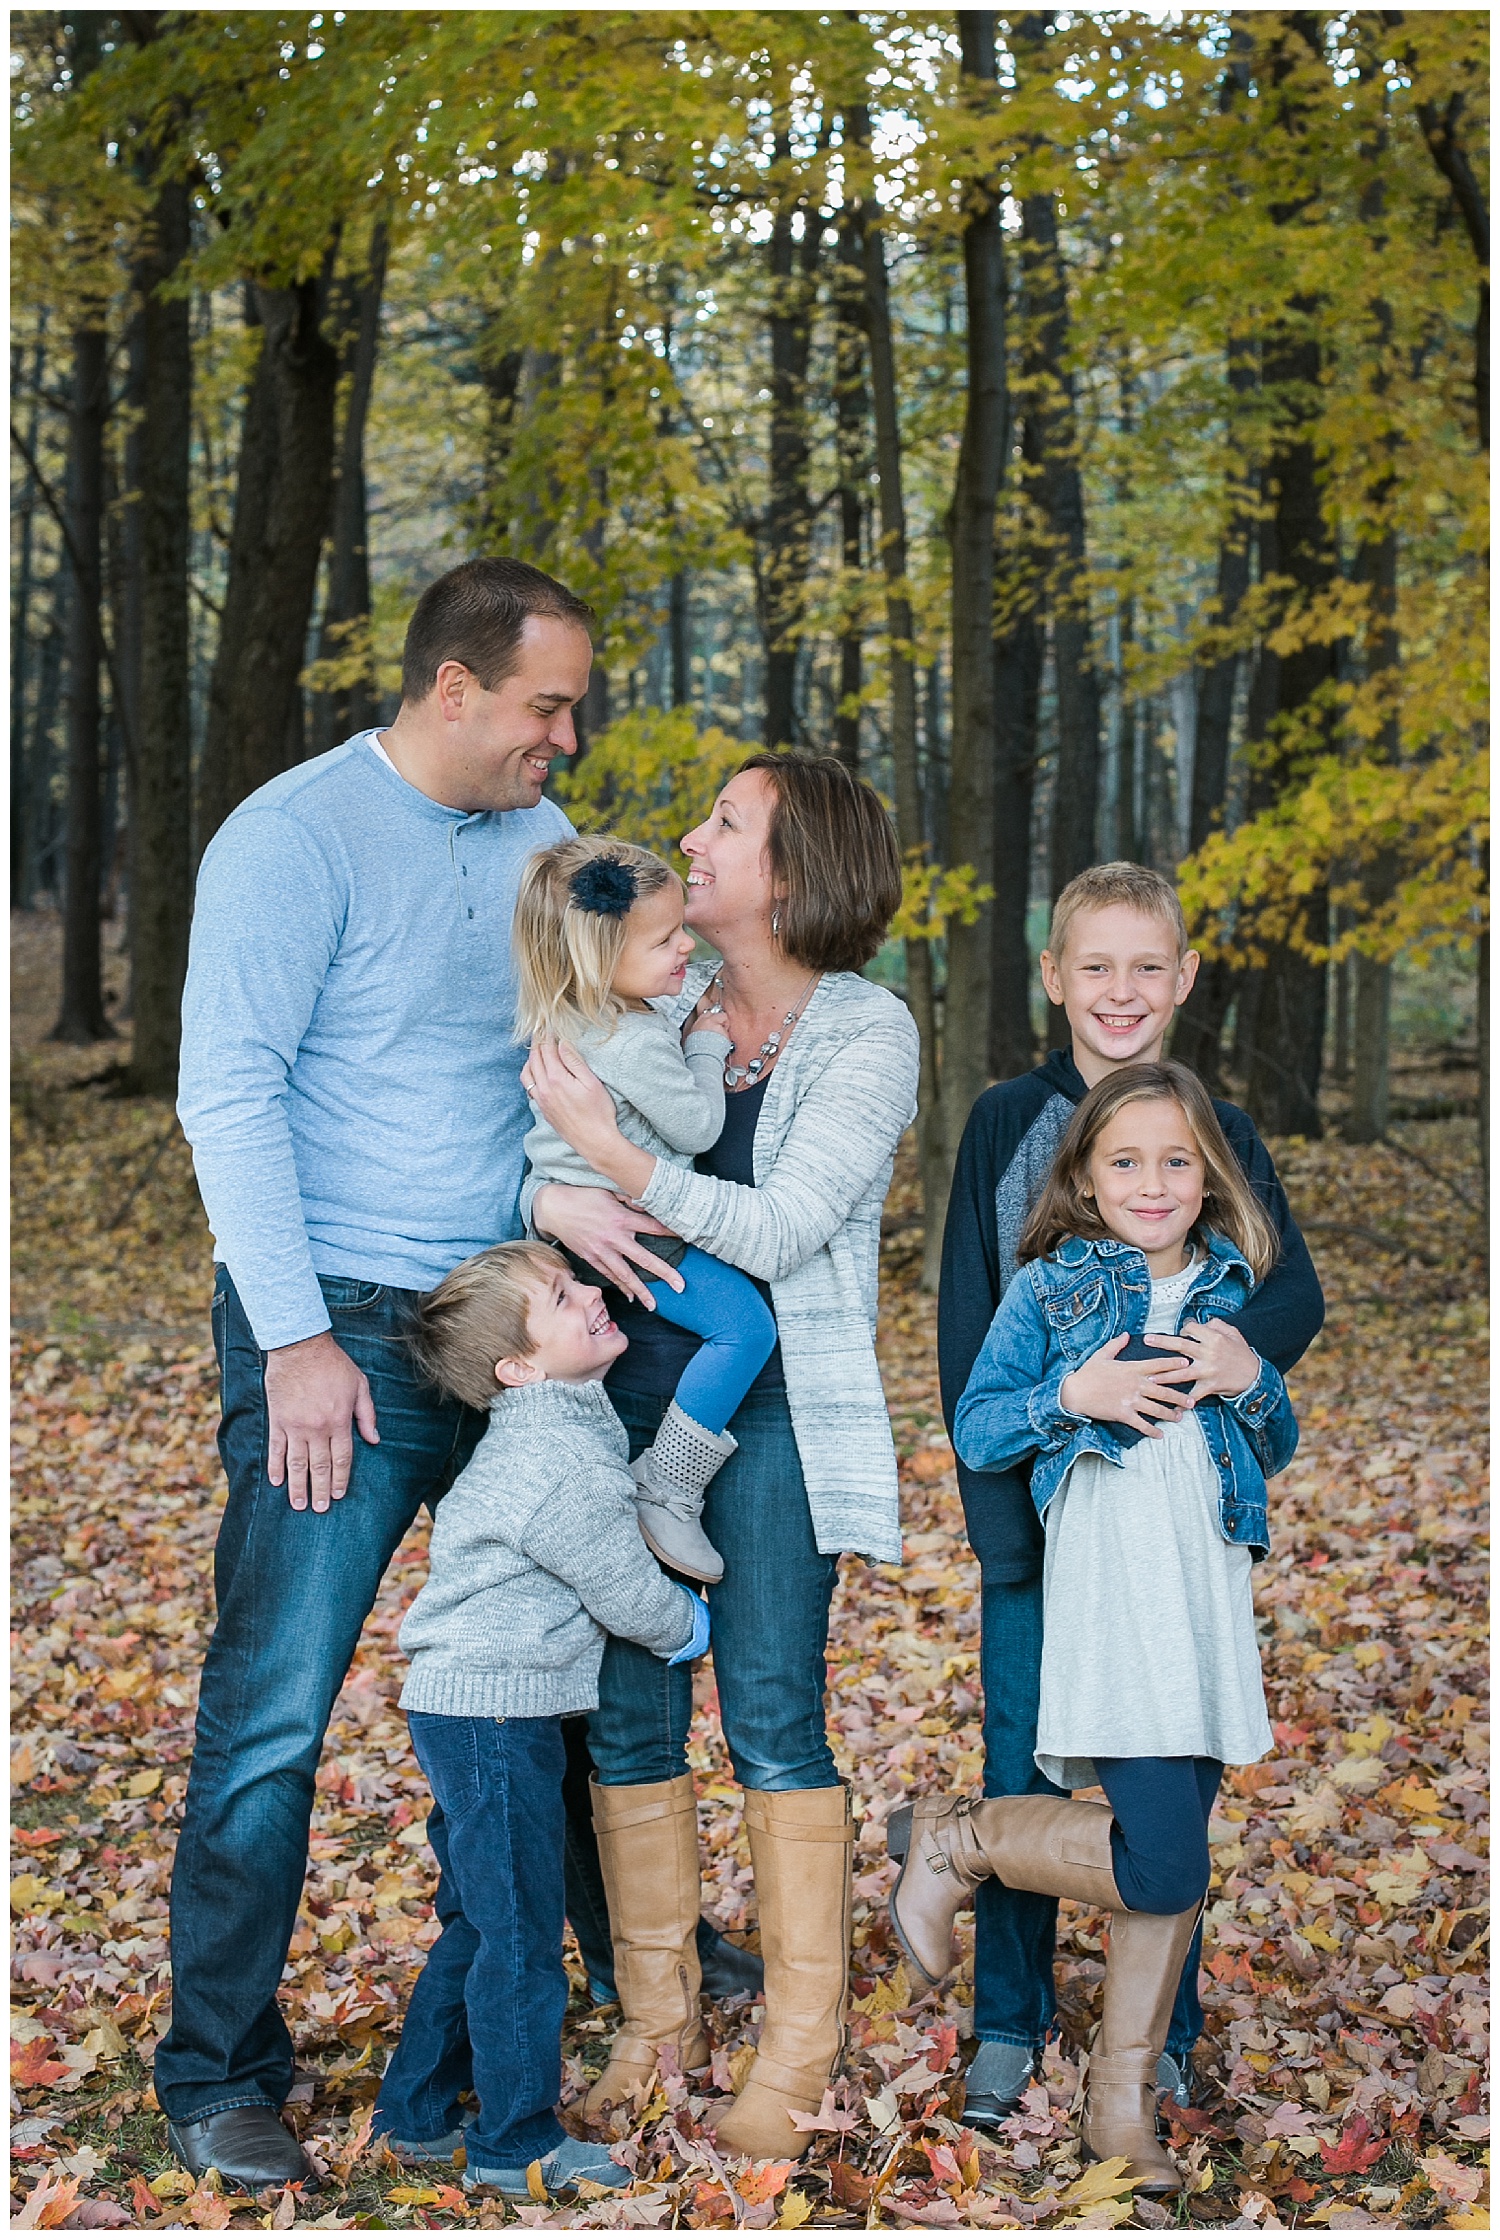 The Schurr family session at Letchworth state park - Whimsy roots photography 2.jpg